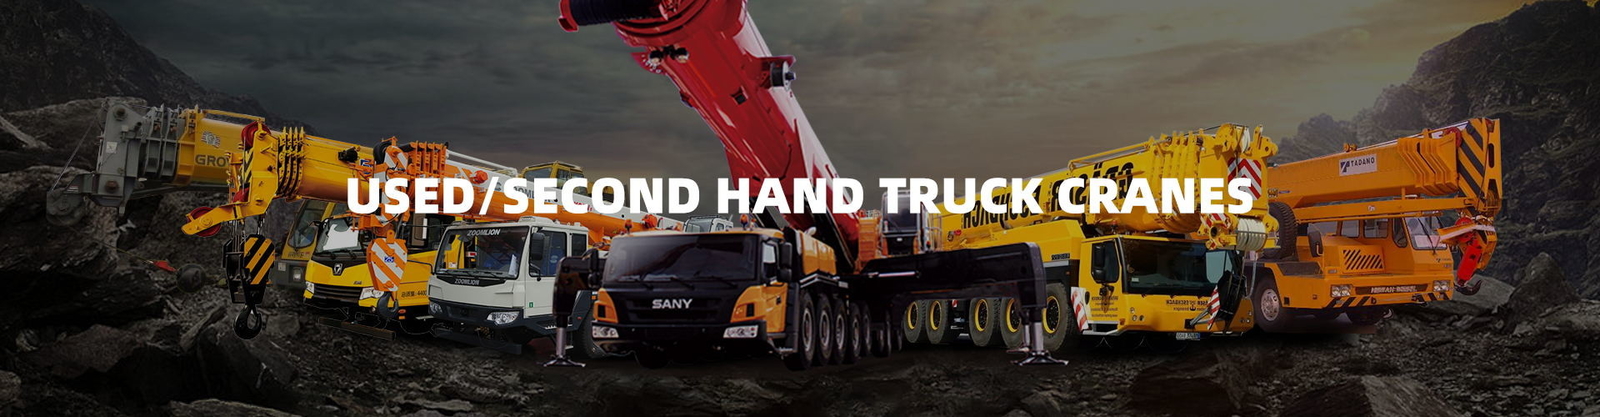 quality Used Truck Cranes factory